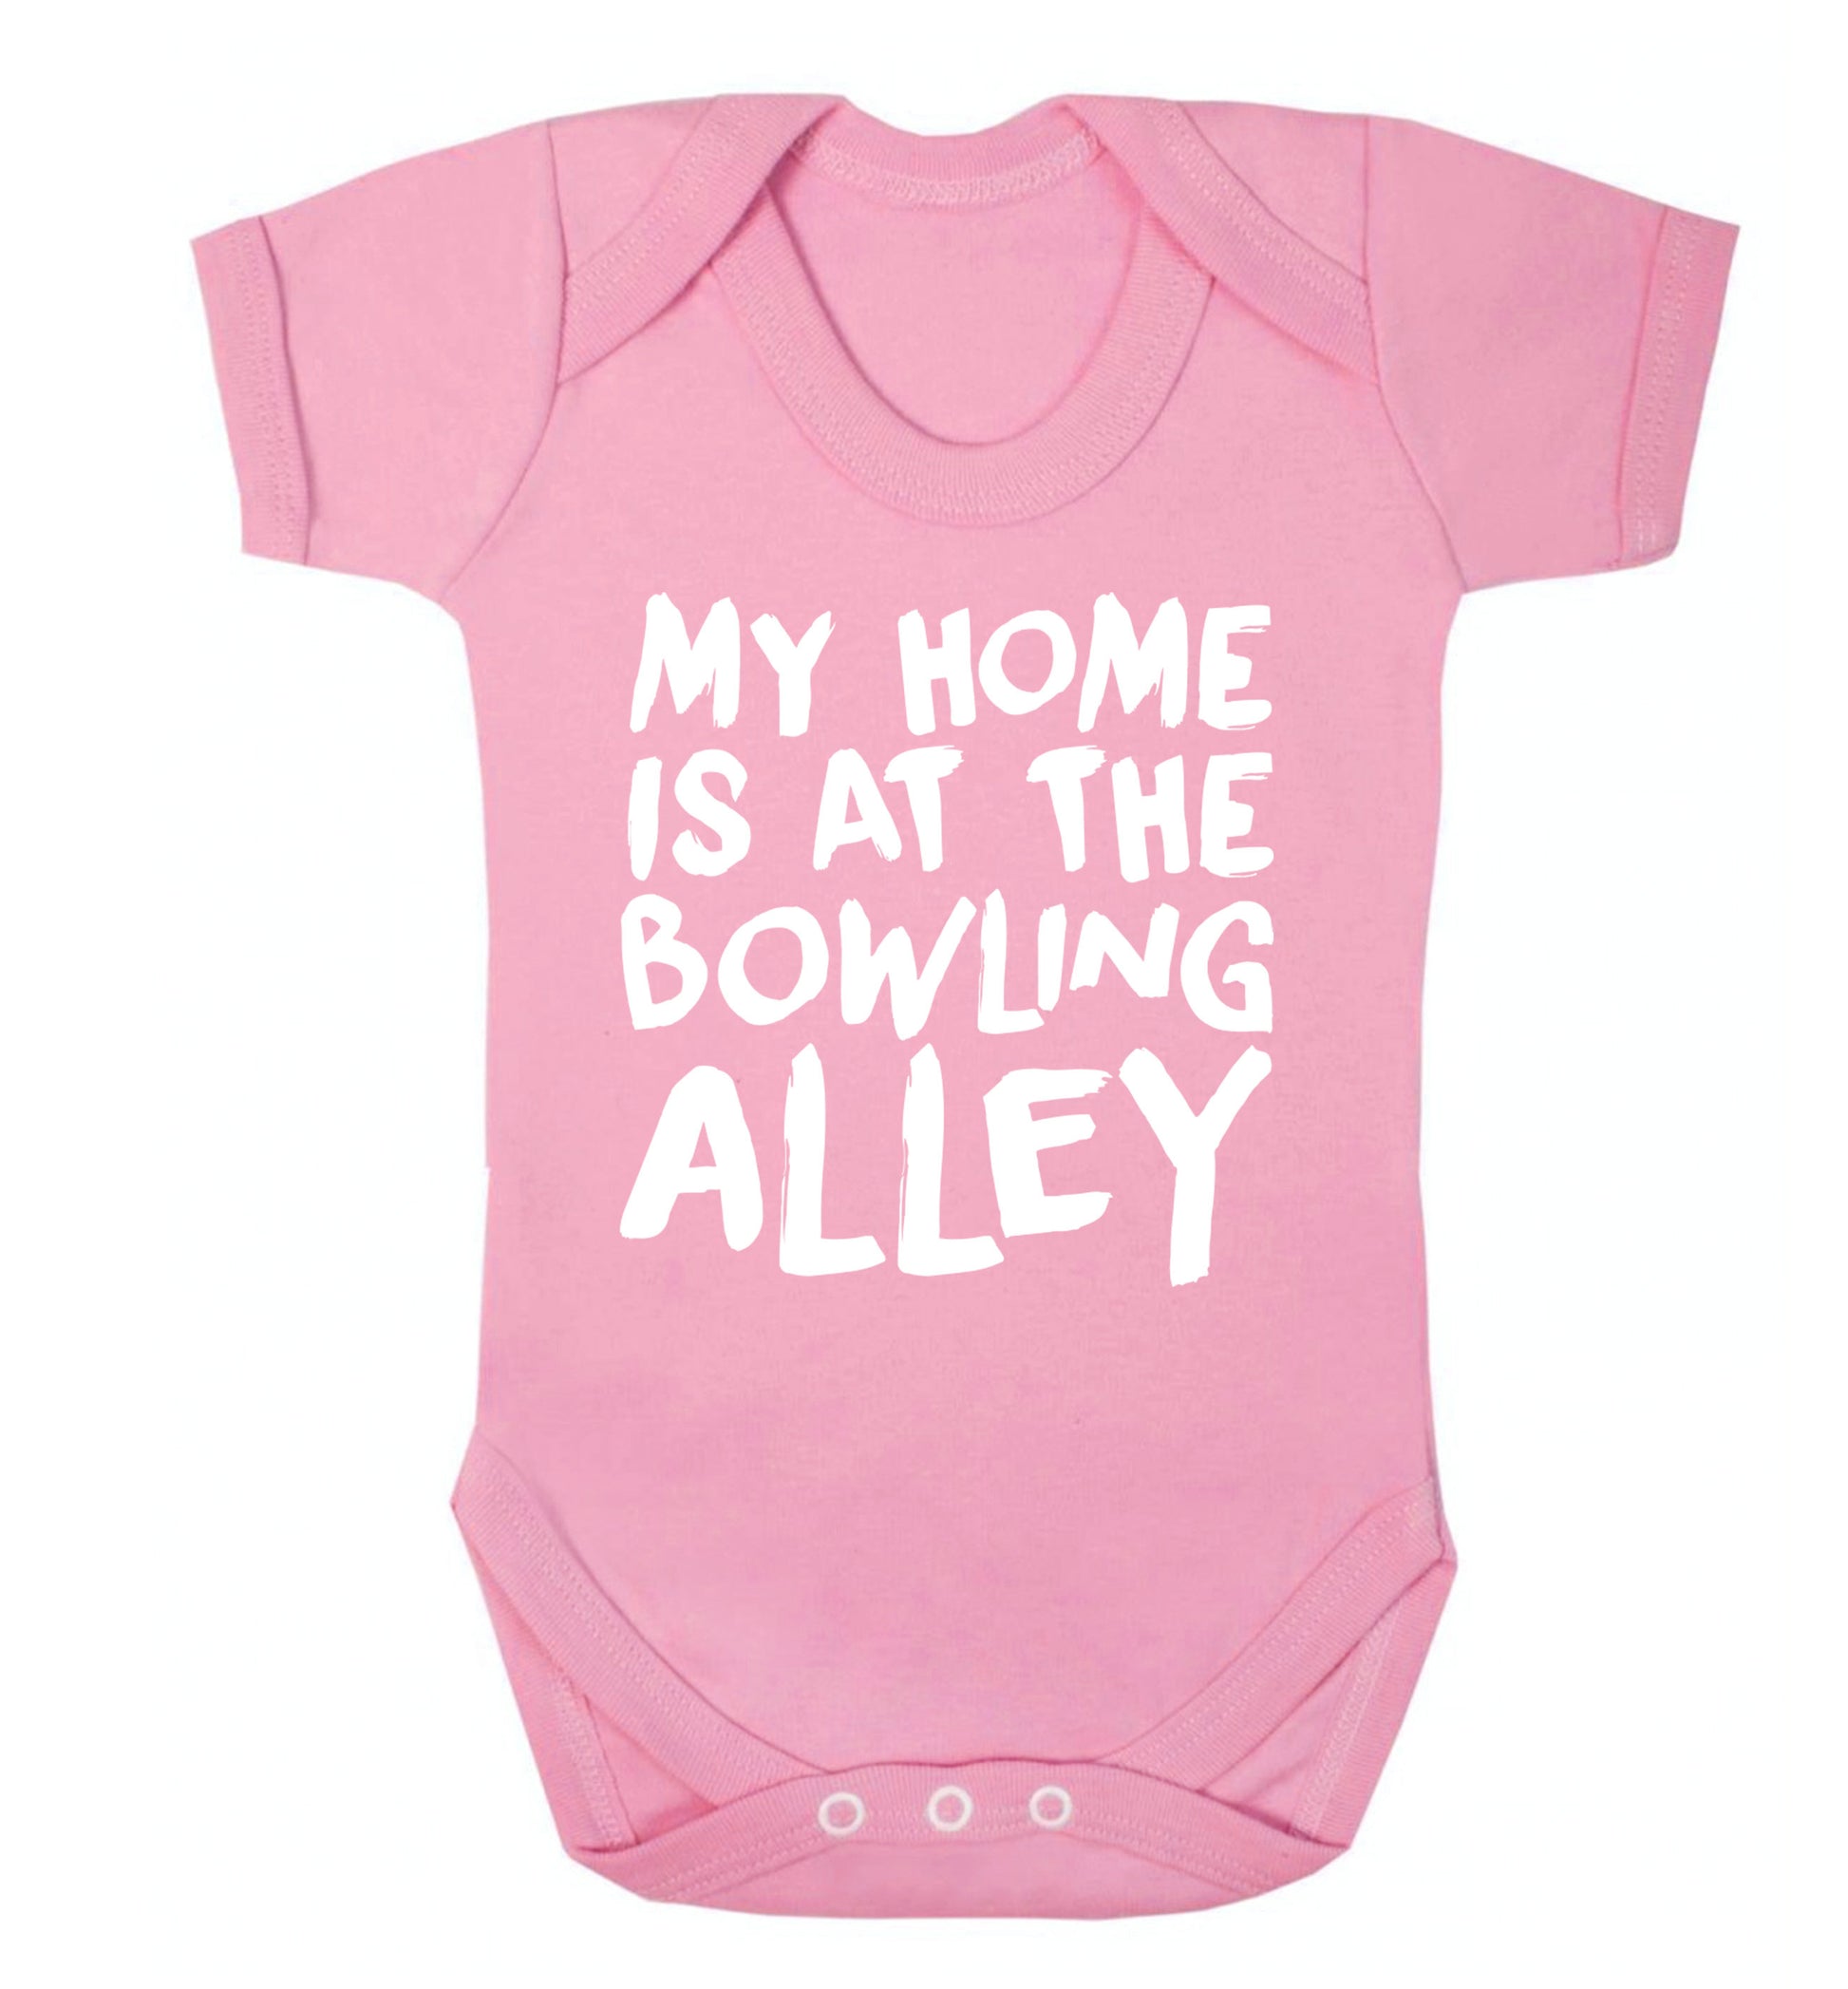 My home is at the bowling alley Baby Vest pale pink 18-24 months